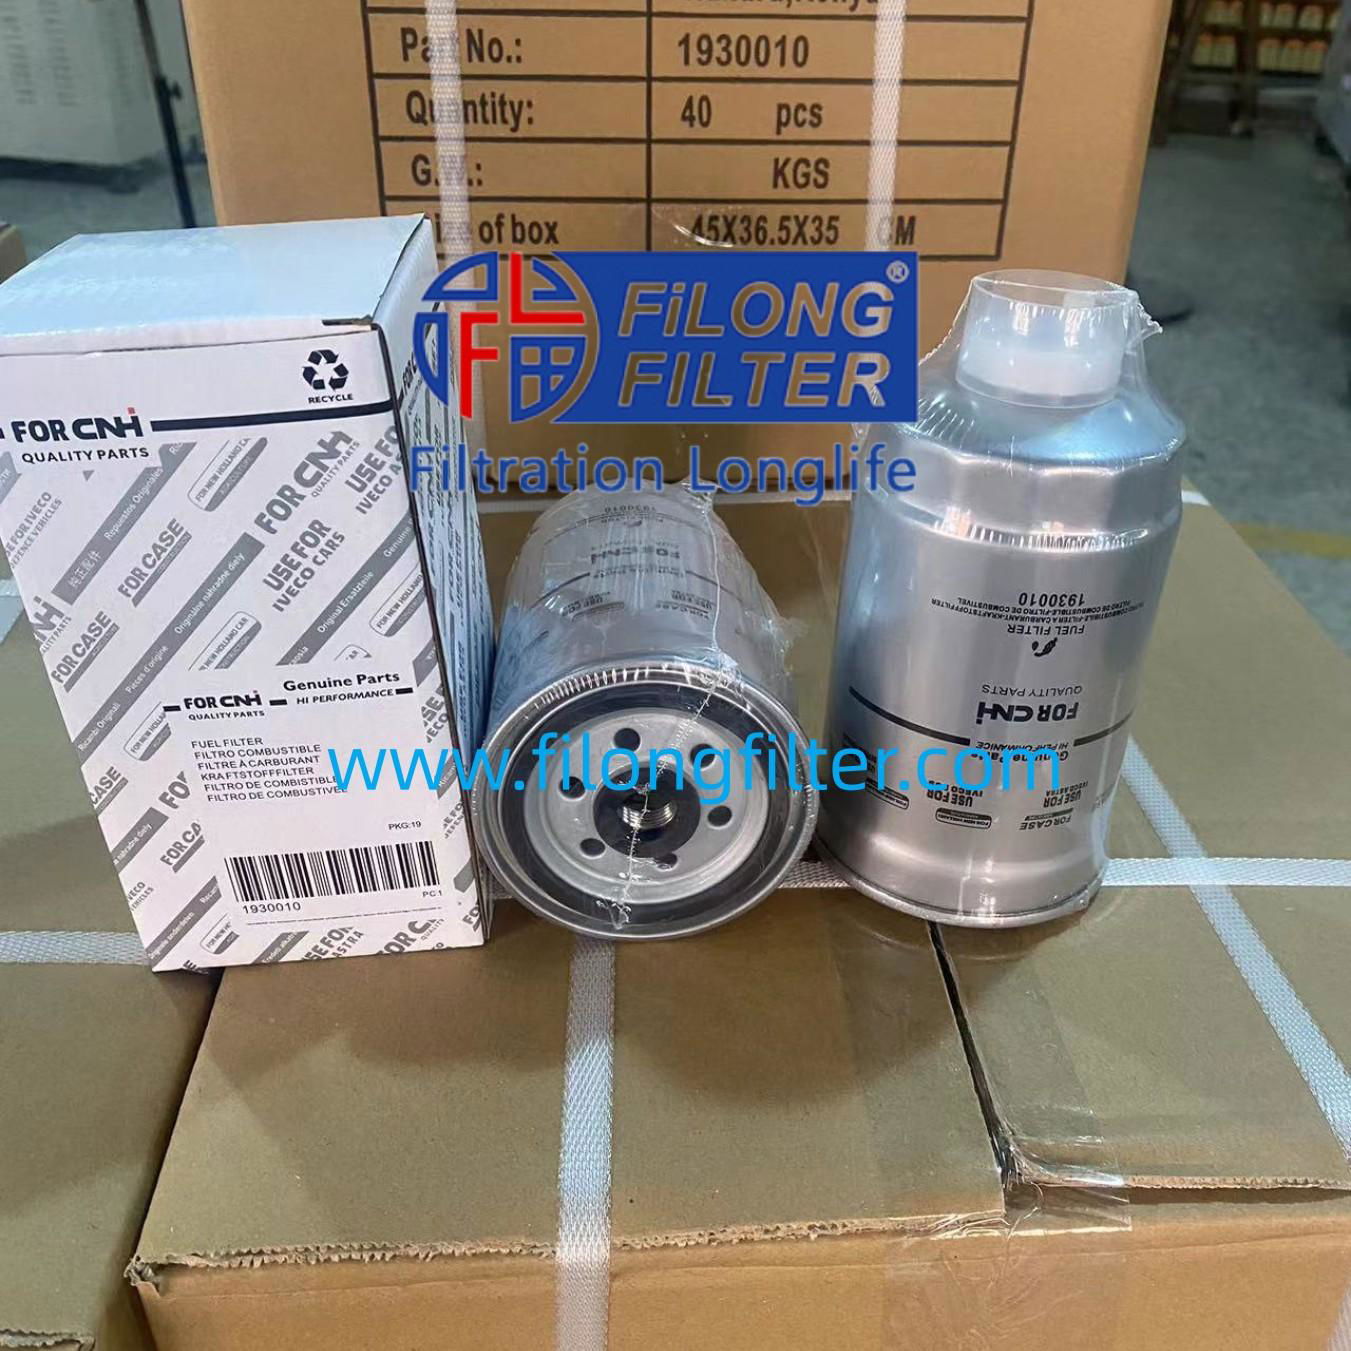 FOR NEW HOLLAND 1930010 84214564 49329-00000 112243 5001850947 39766555 74035556 fuel filter